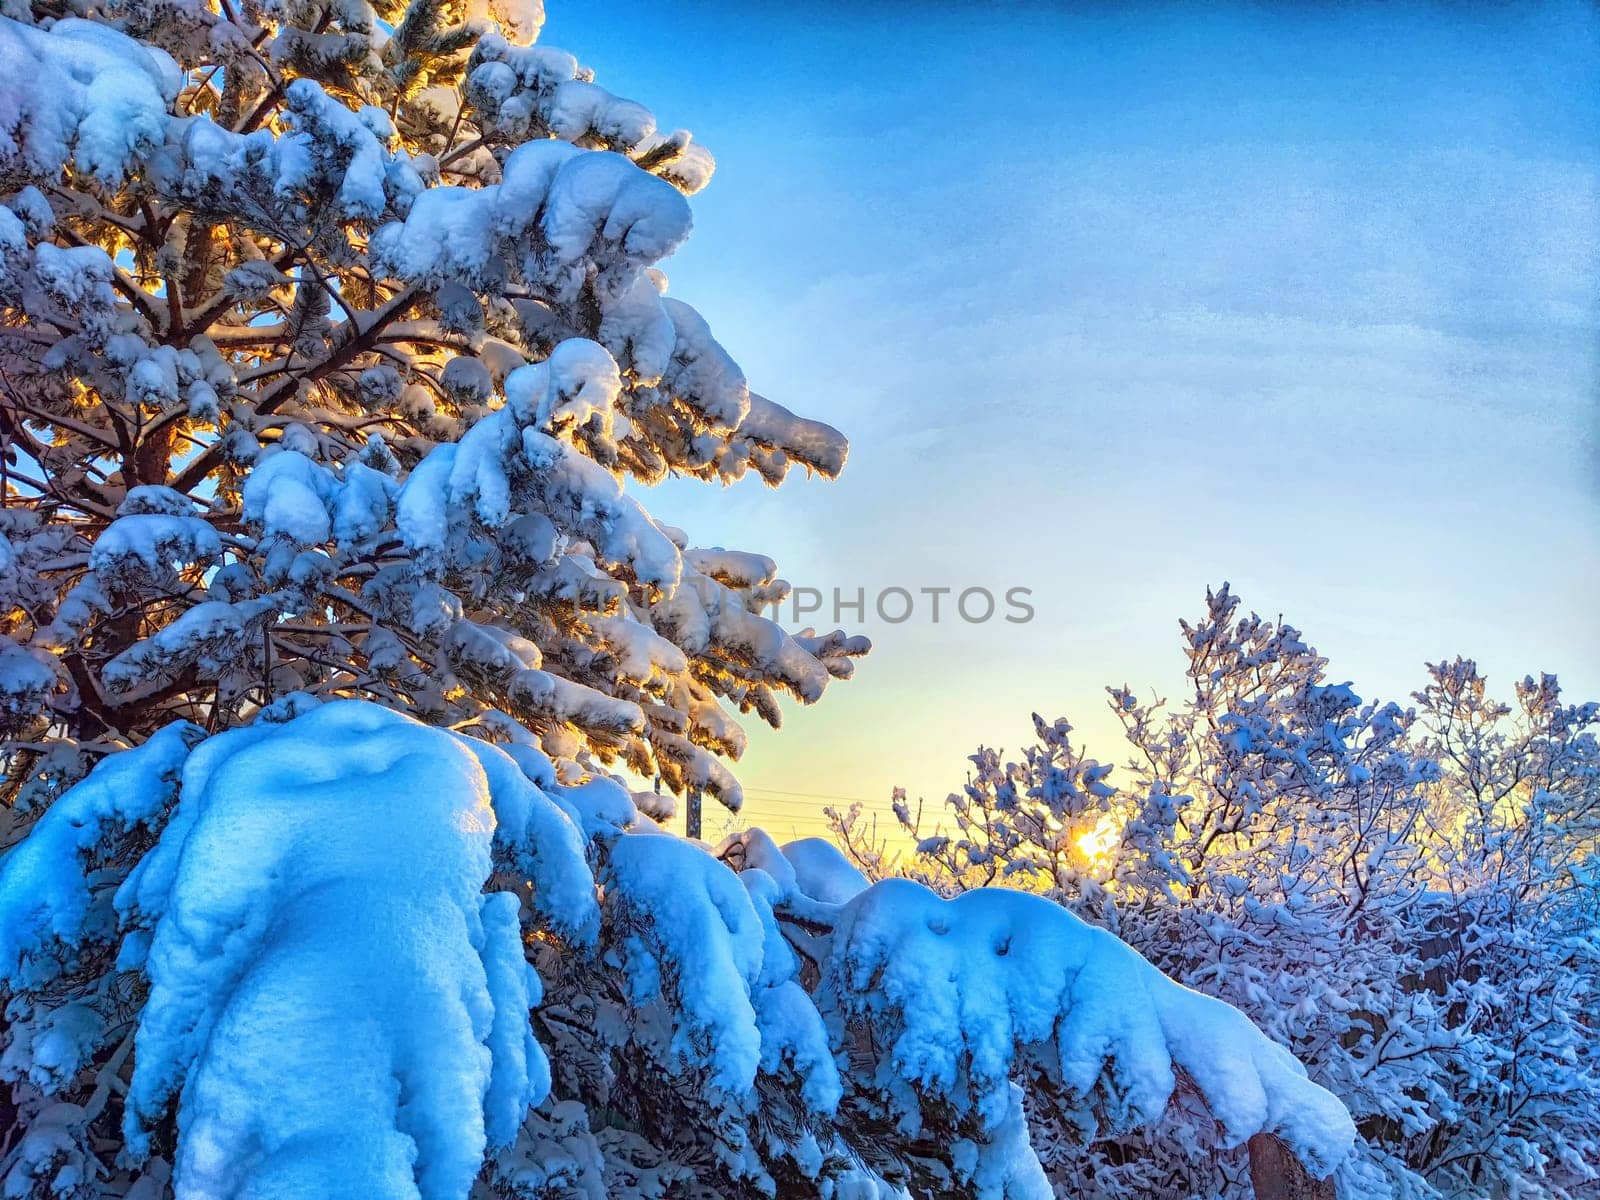 Winter Wonderland at Dusk With Snow-Covered Trees forest and blue sky with white clouds. Cold winter forest